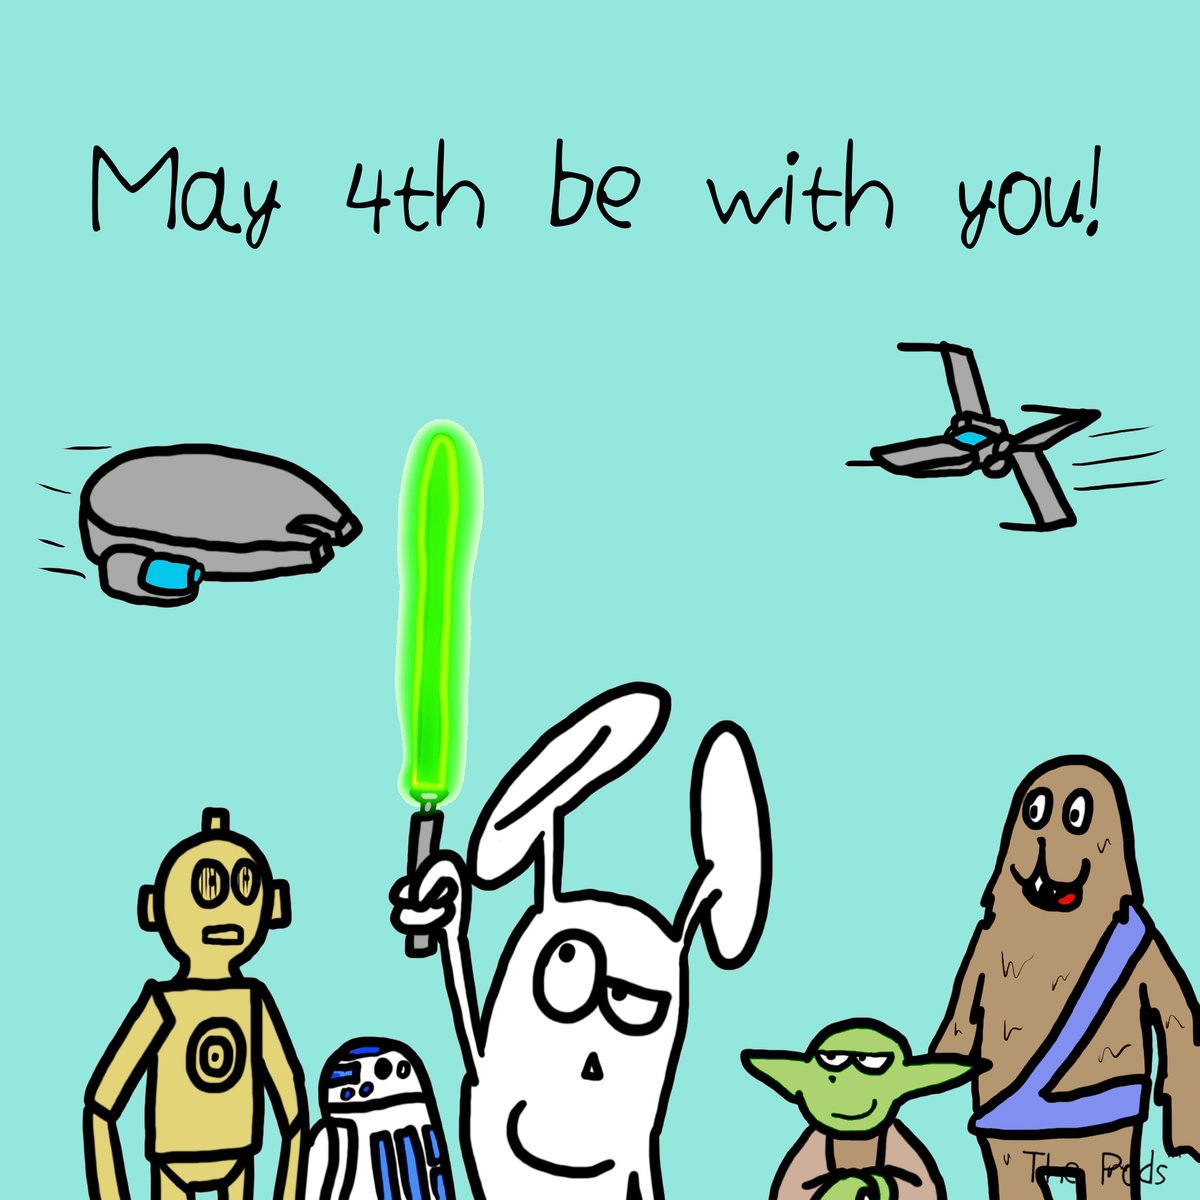 The force will be with you always, happy #StarWarsday everyone! #maytheforcebewithyou #maythe4thbewithyou #starwars #skywalkersaga #lightsaber #lightsabers #yoda #jedi #theforce #c3po #r2d2 #meetthepods #thepods #bunnypod #may4th #may4thbewithu #may4th2024 #may4thbewithyou